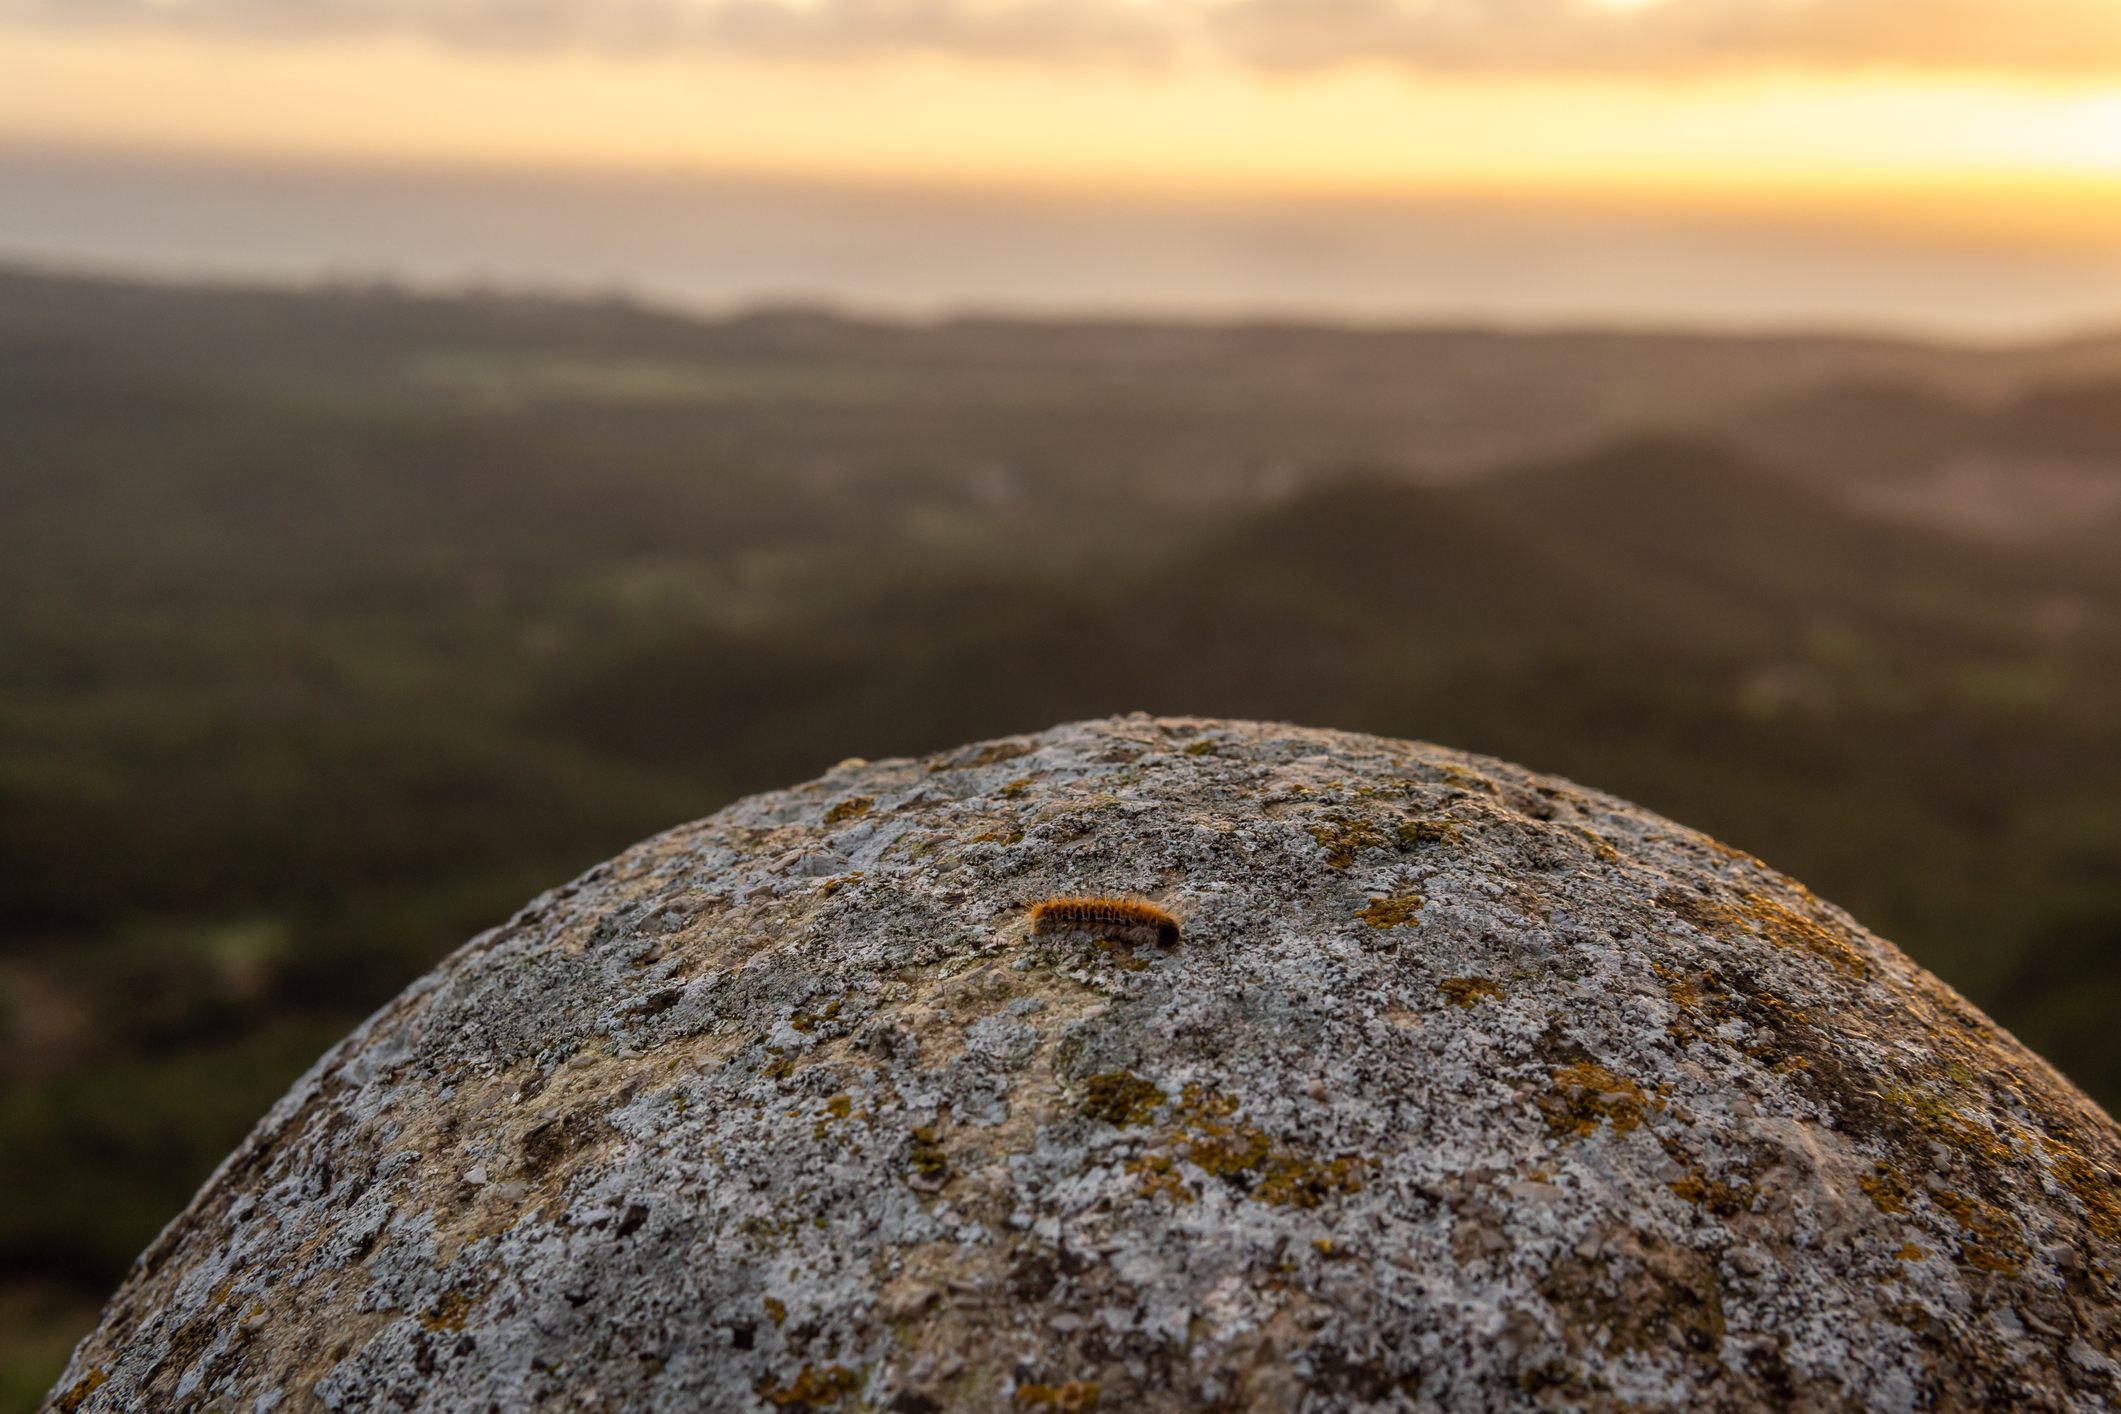 Processionary worms, Thaumetopoea pityocampa, on a rock at dawn on the island of Mallorca, Spain